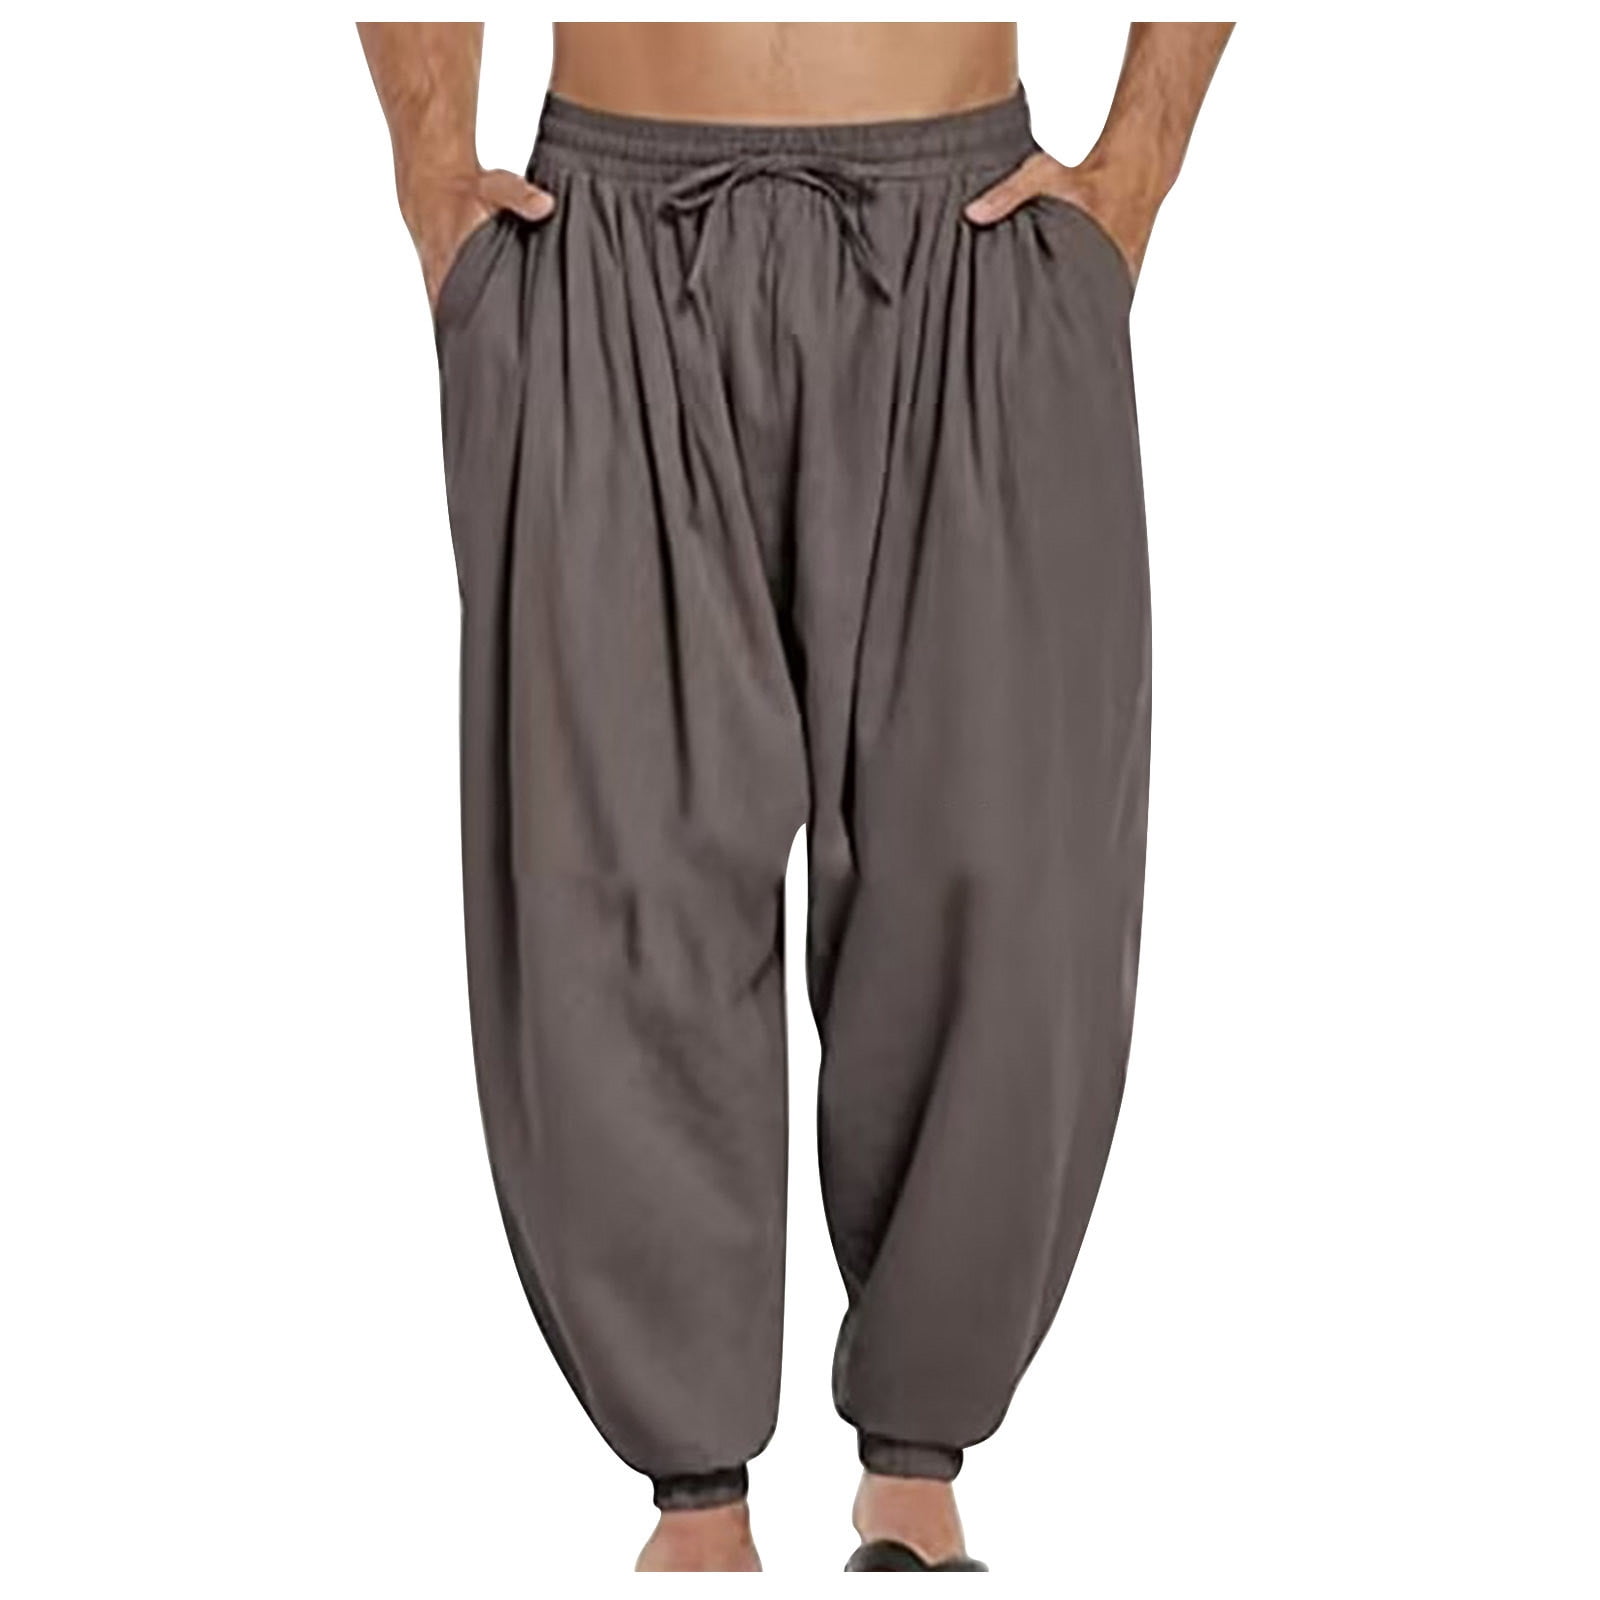 Fpqtro Mens Sweatpants Fruit Of The Loom Plus Size Clearance Under 10 ...